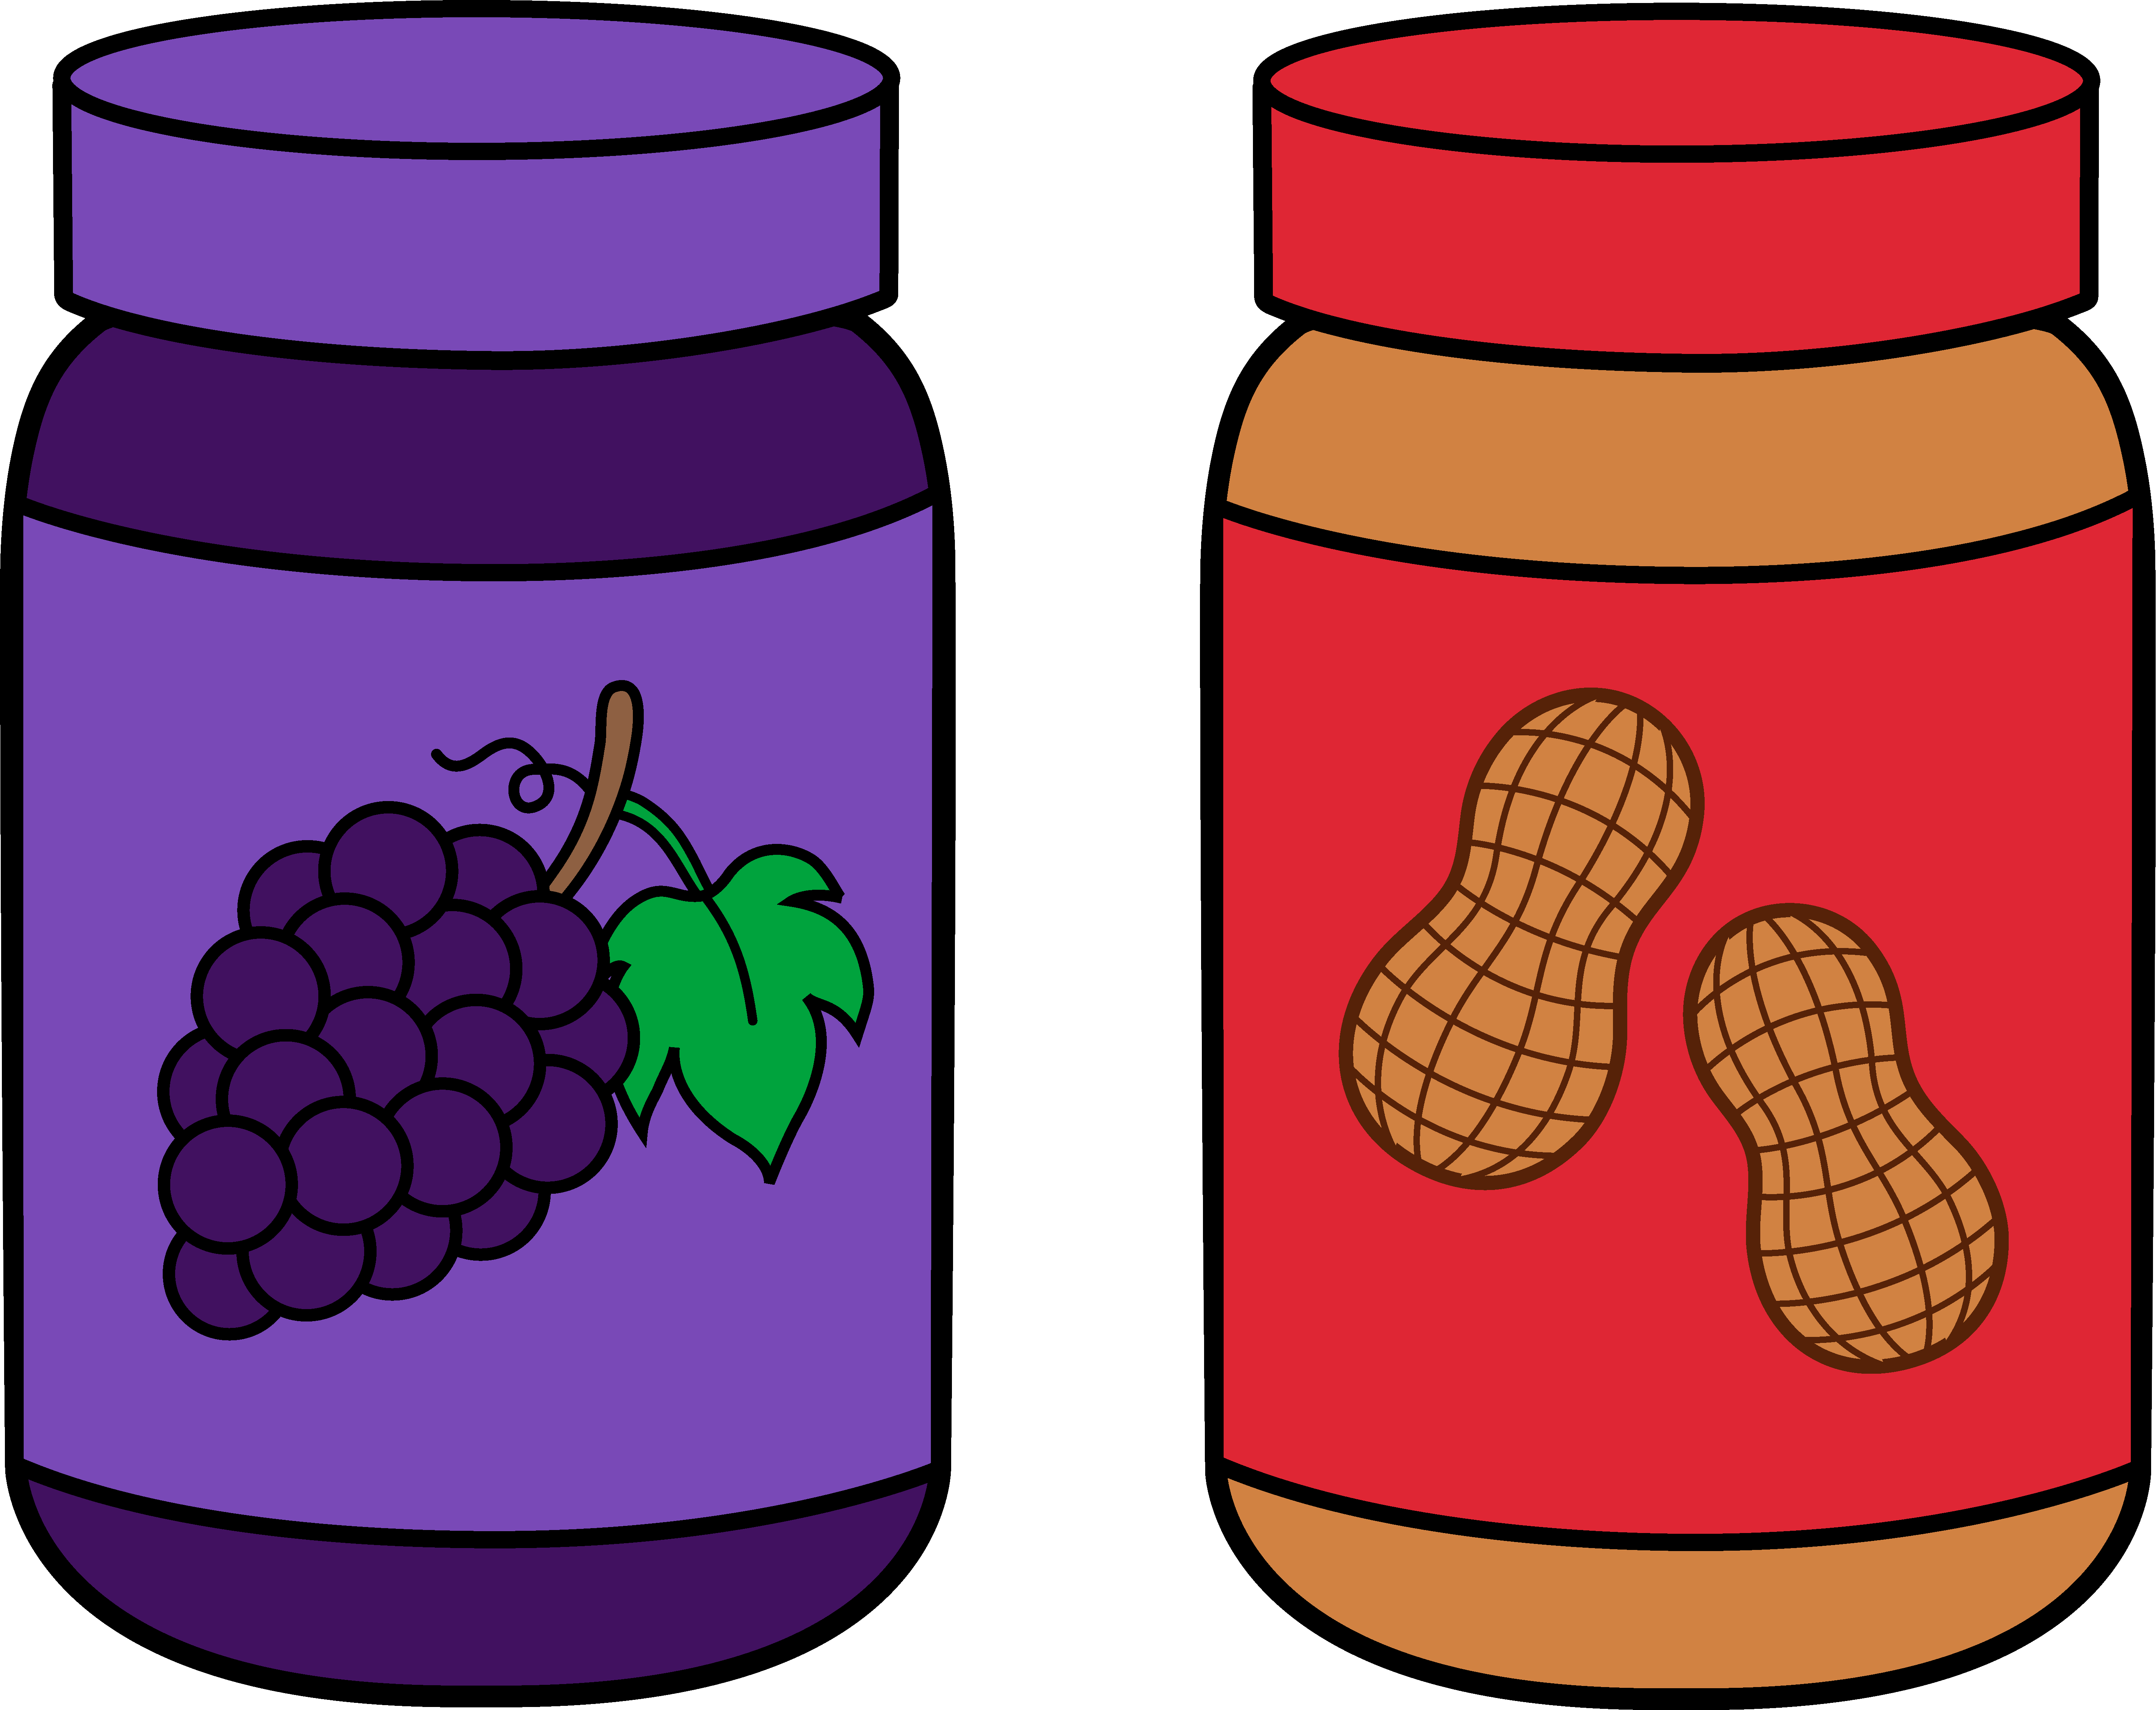 Free Peanut Butter Cliparts, Download Free Clip Art, Free.